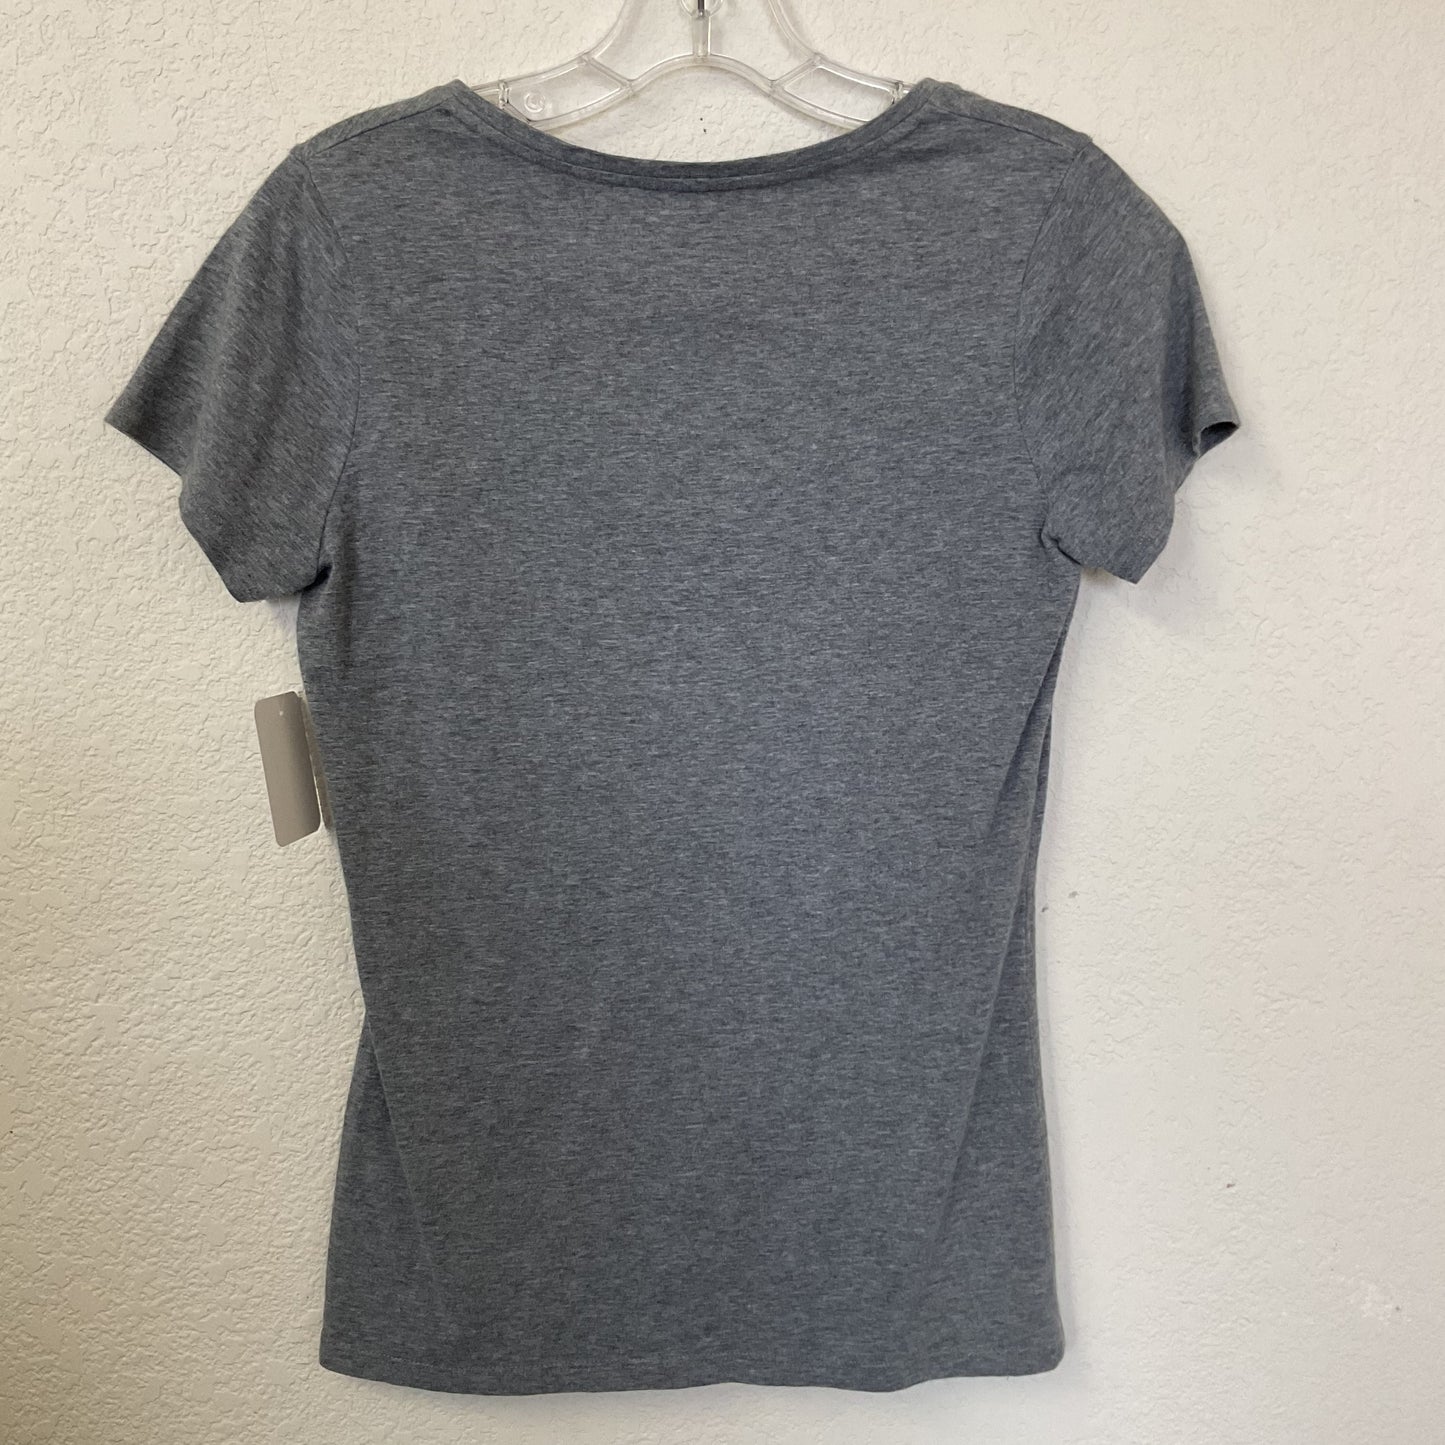 Mossimo Basic V-neck Women’s Fitted T-shirt Size S.